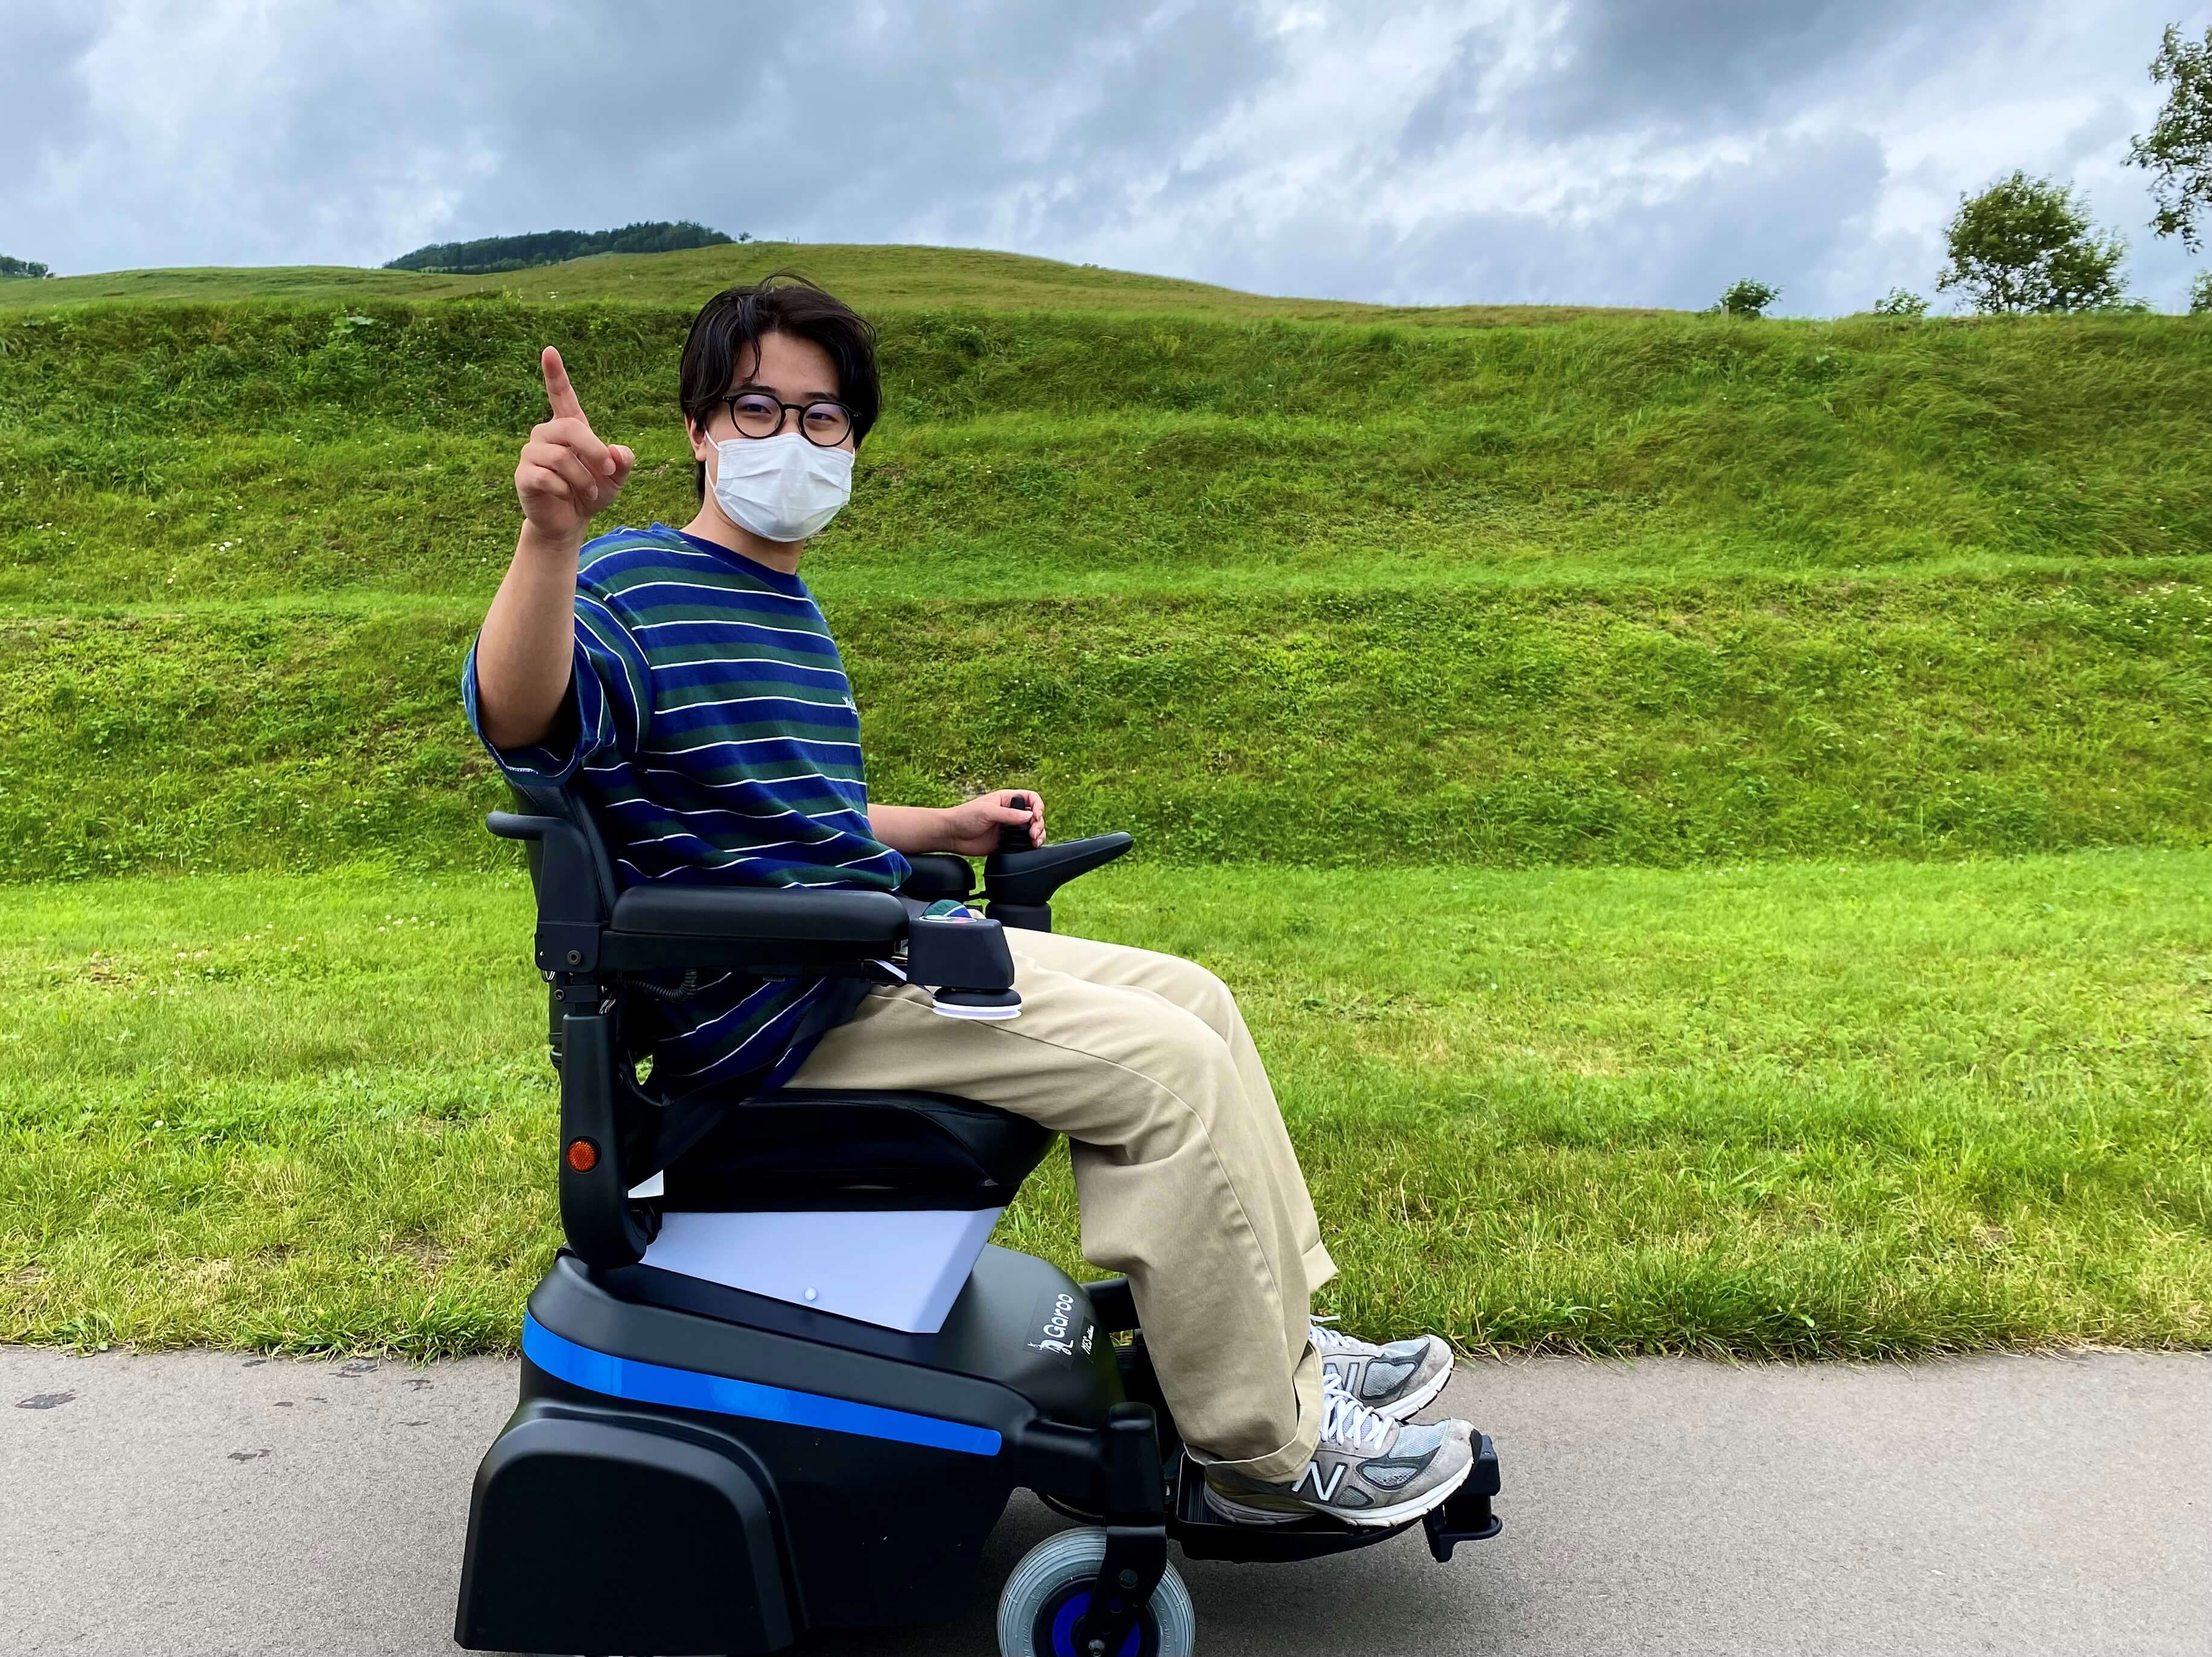 Next-generation electric wheelchair riding experience